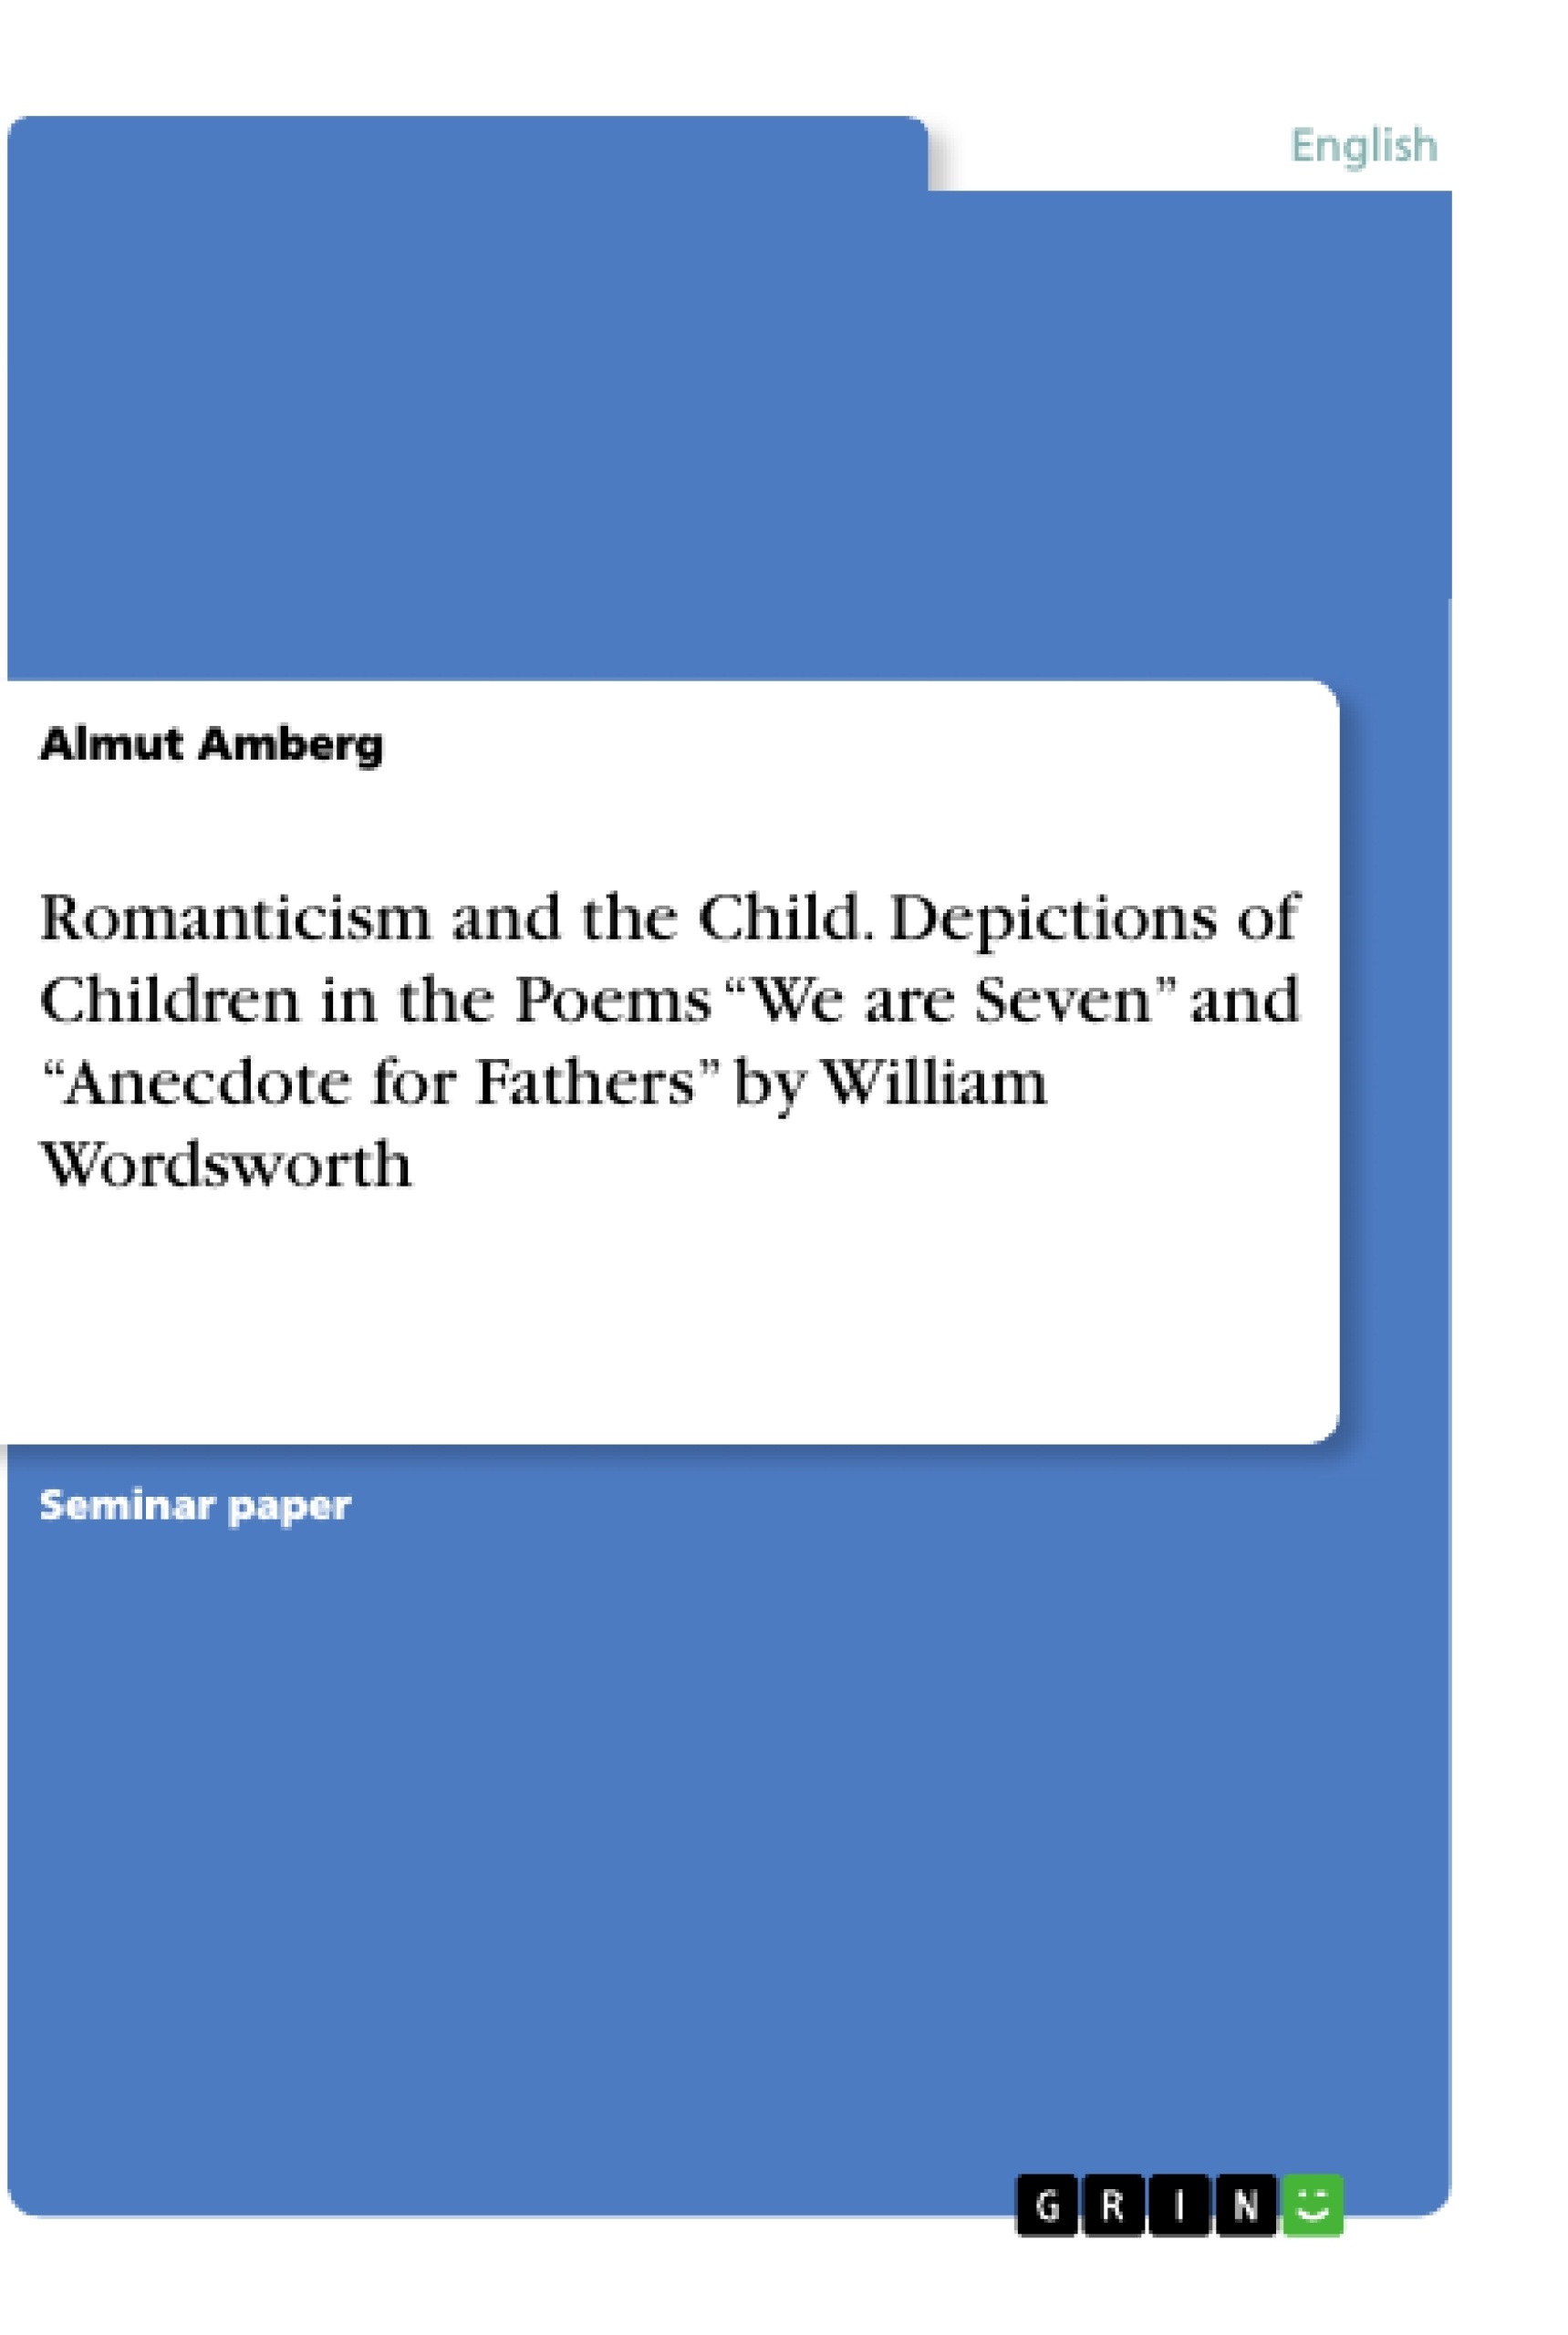 Title: Romanticism and the Child. Depictions of Children in the Poems “We are Seven” and “Anecdote for Fathers” by William Wordsworth